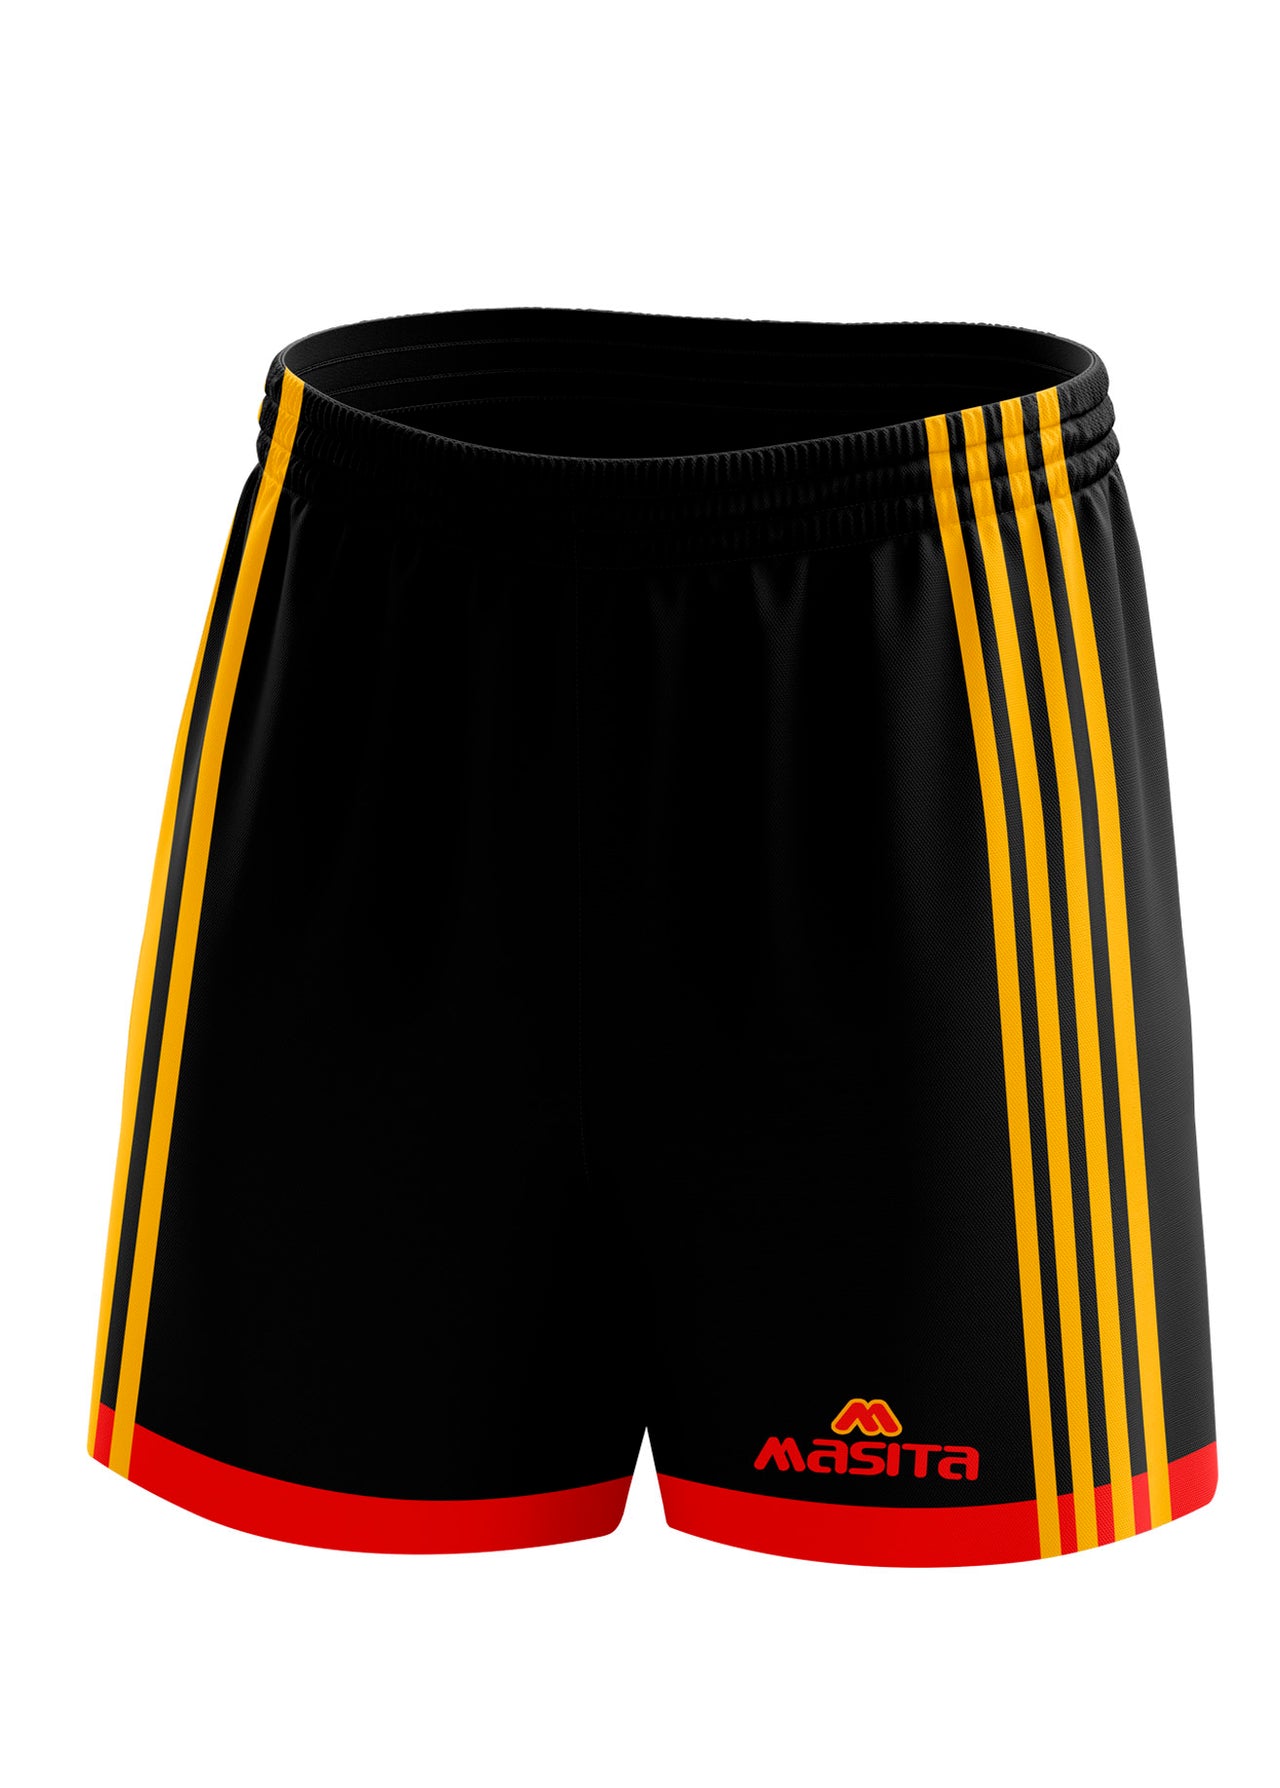 Solo Gaelic Shorts Black/Red/Amber Adult